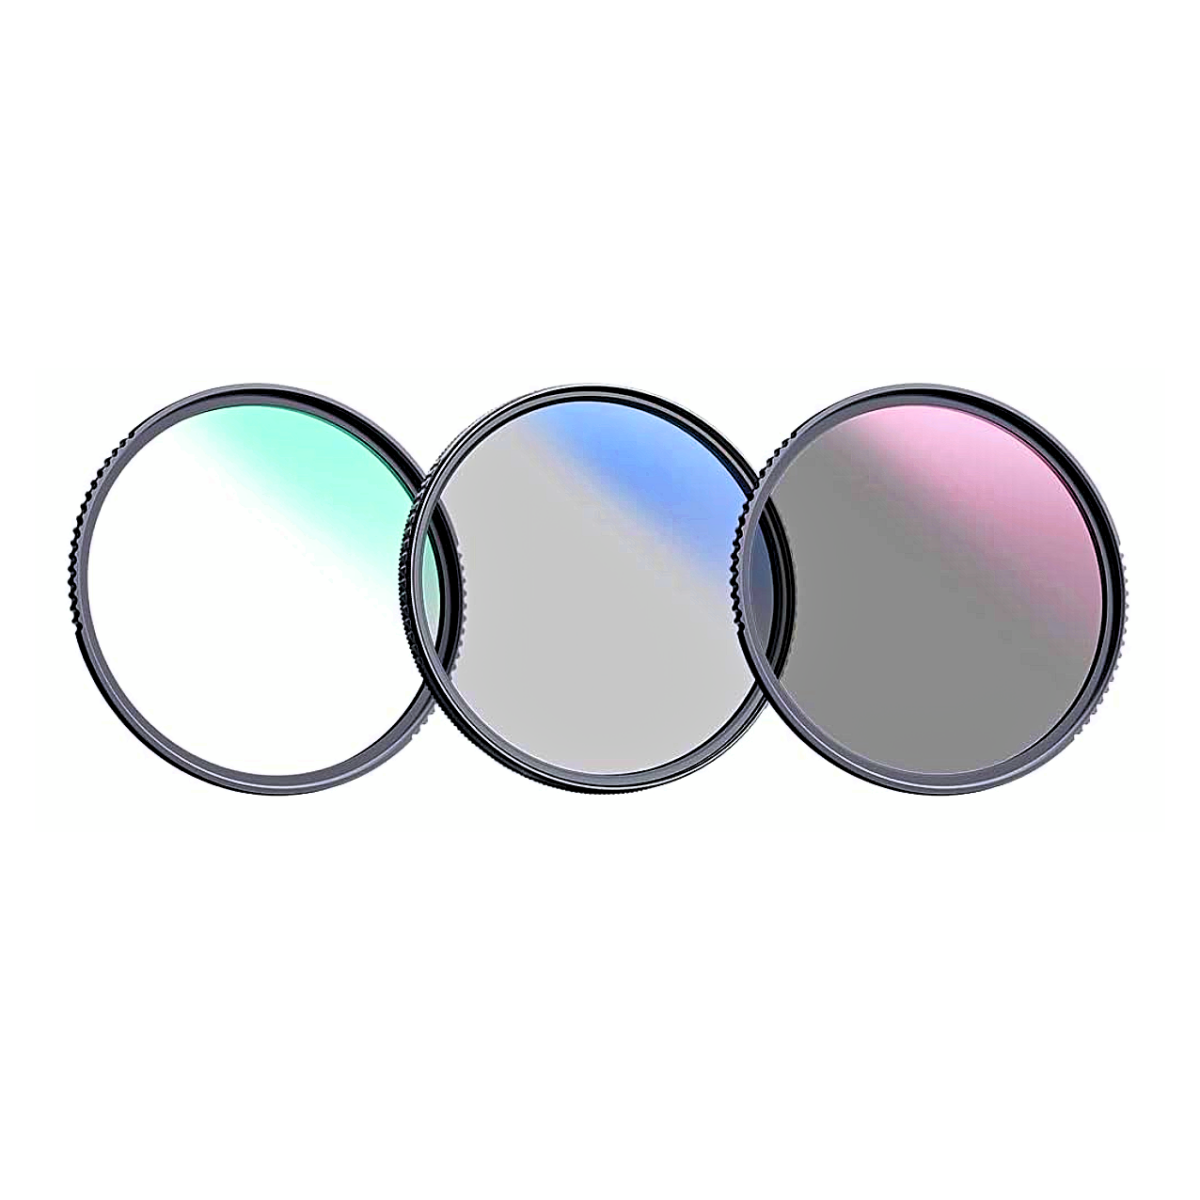 The UV/CPL/ND filters in the K&F Concept Lens Filter Kit